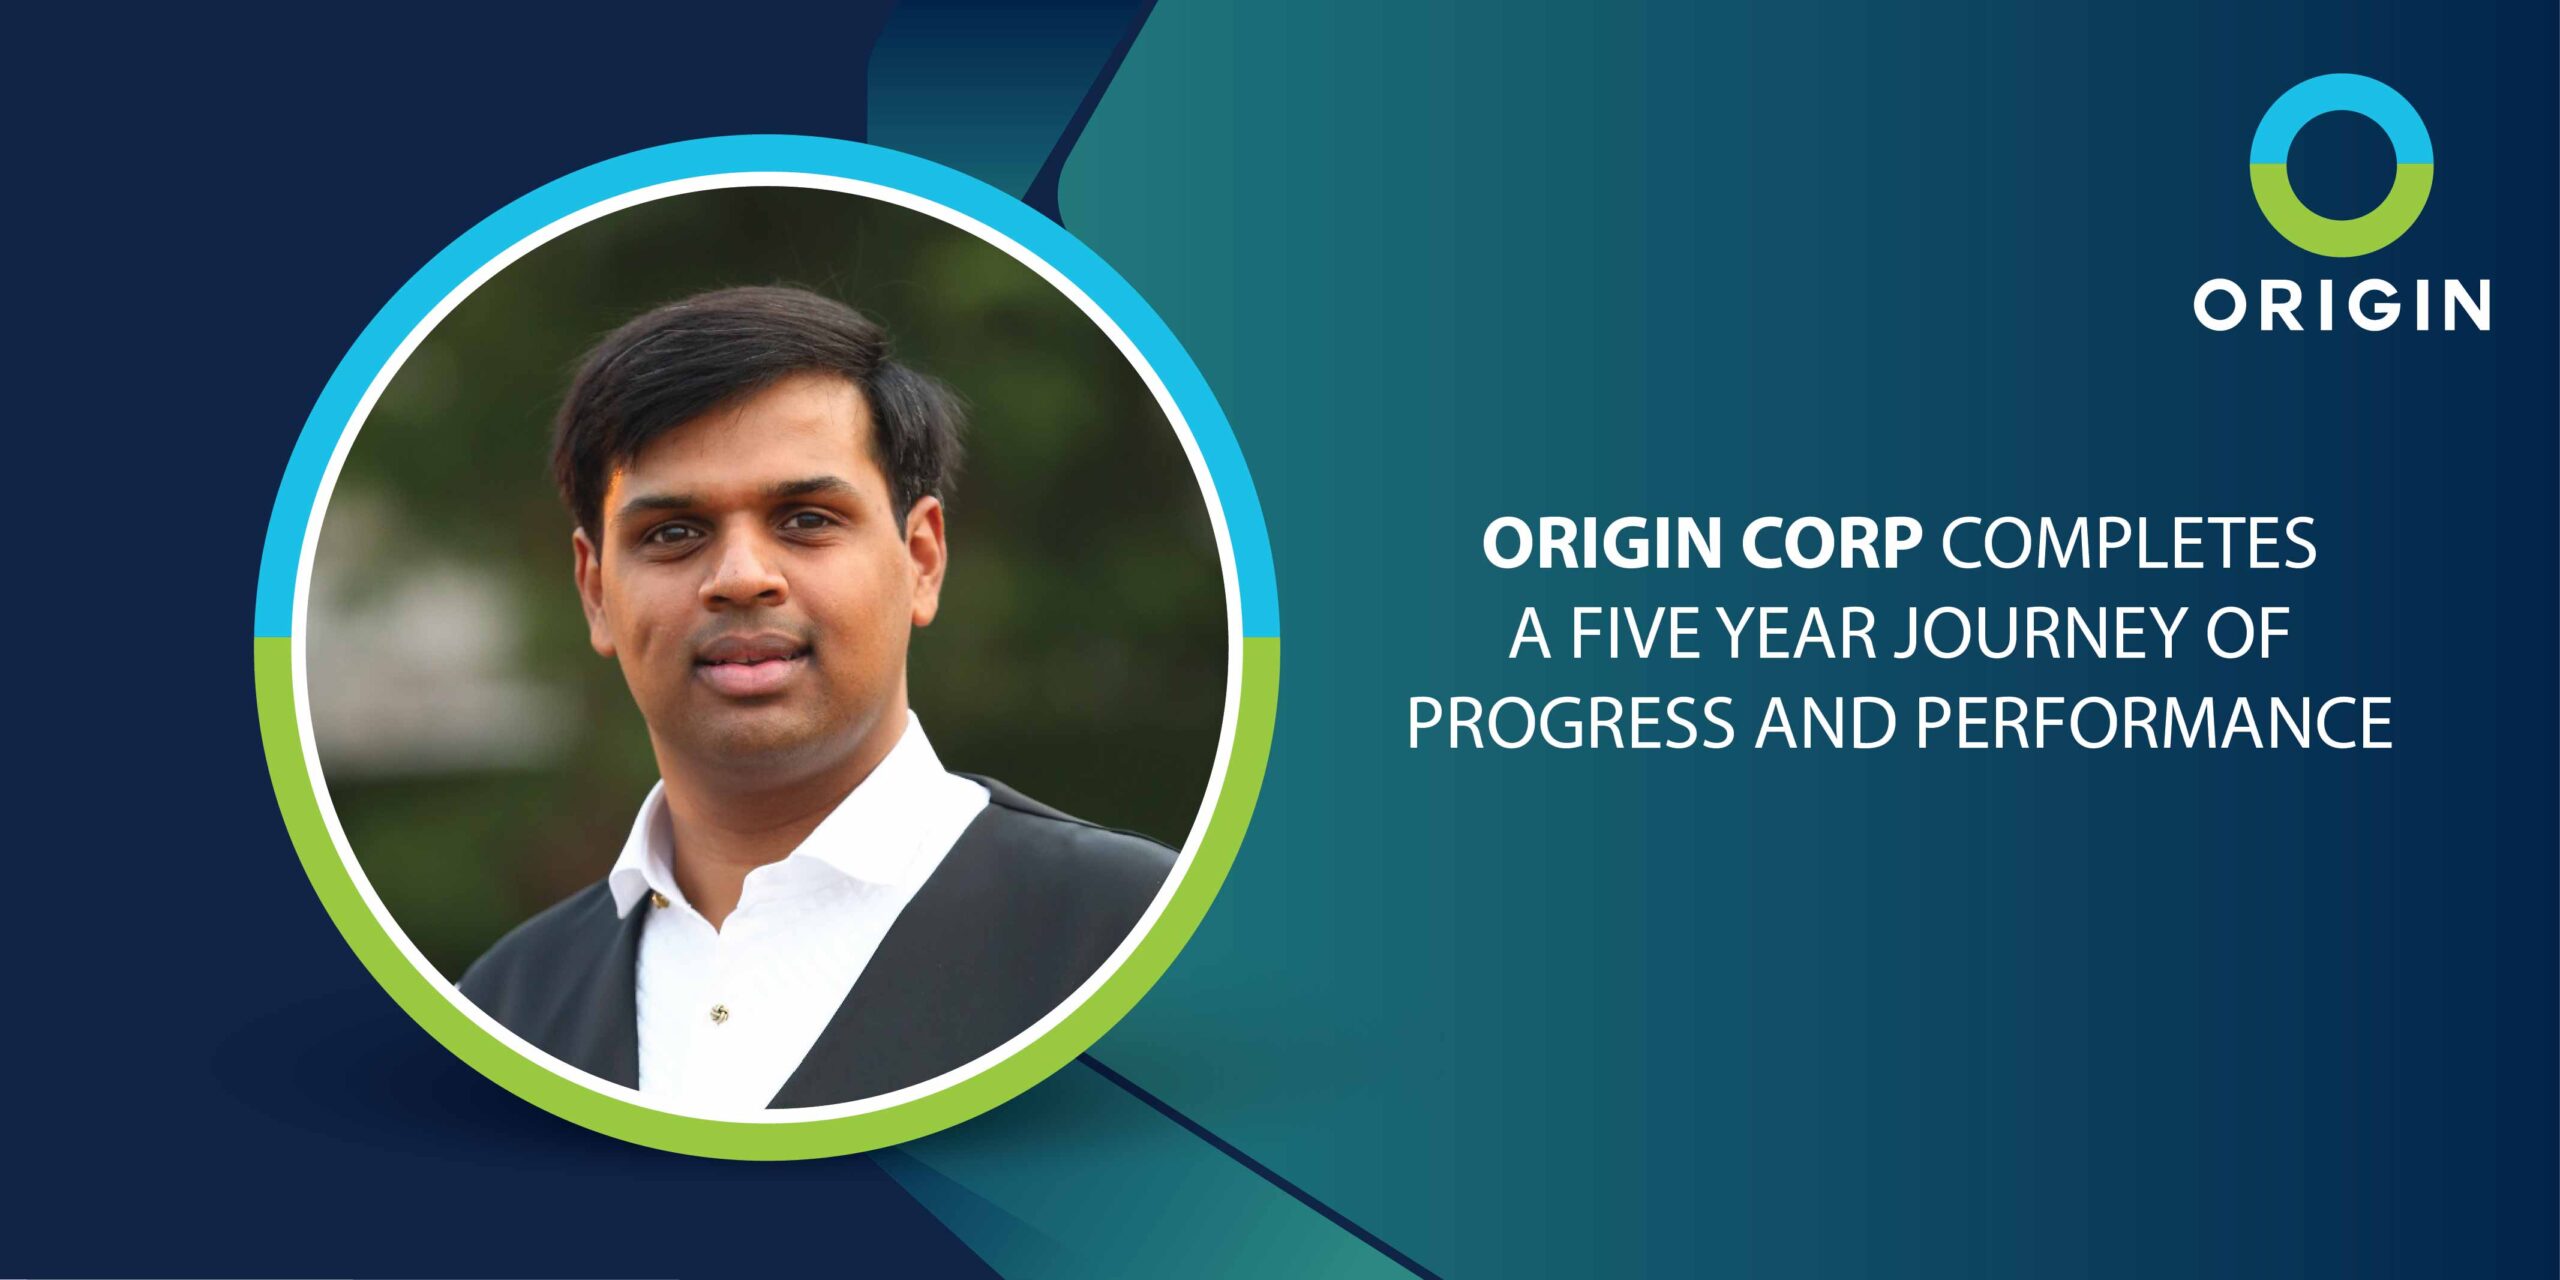 ORIGIN CORP COMPLETES A FIVE YEAR JOURNEY OF PROGRESS AND PERFORMANCE...